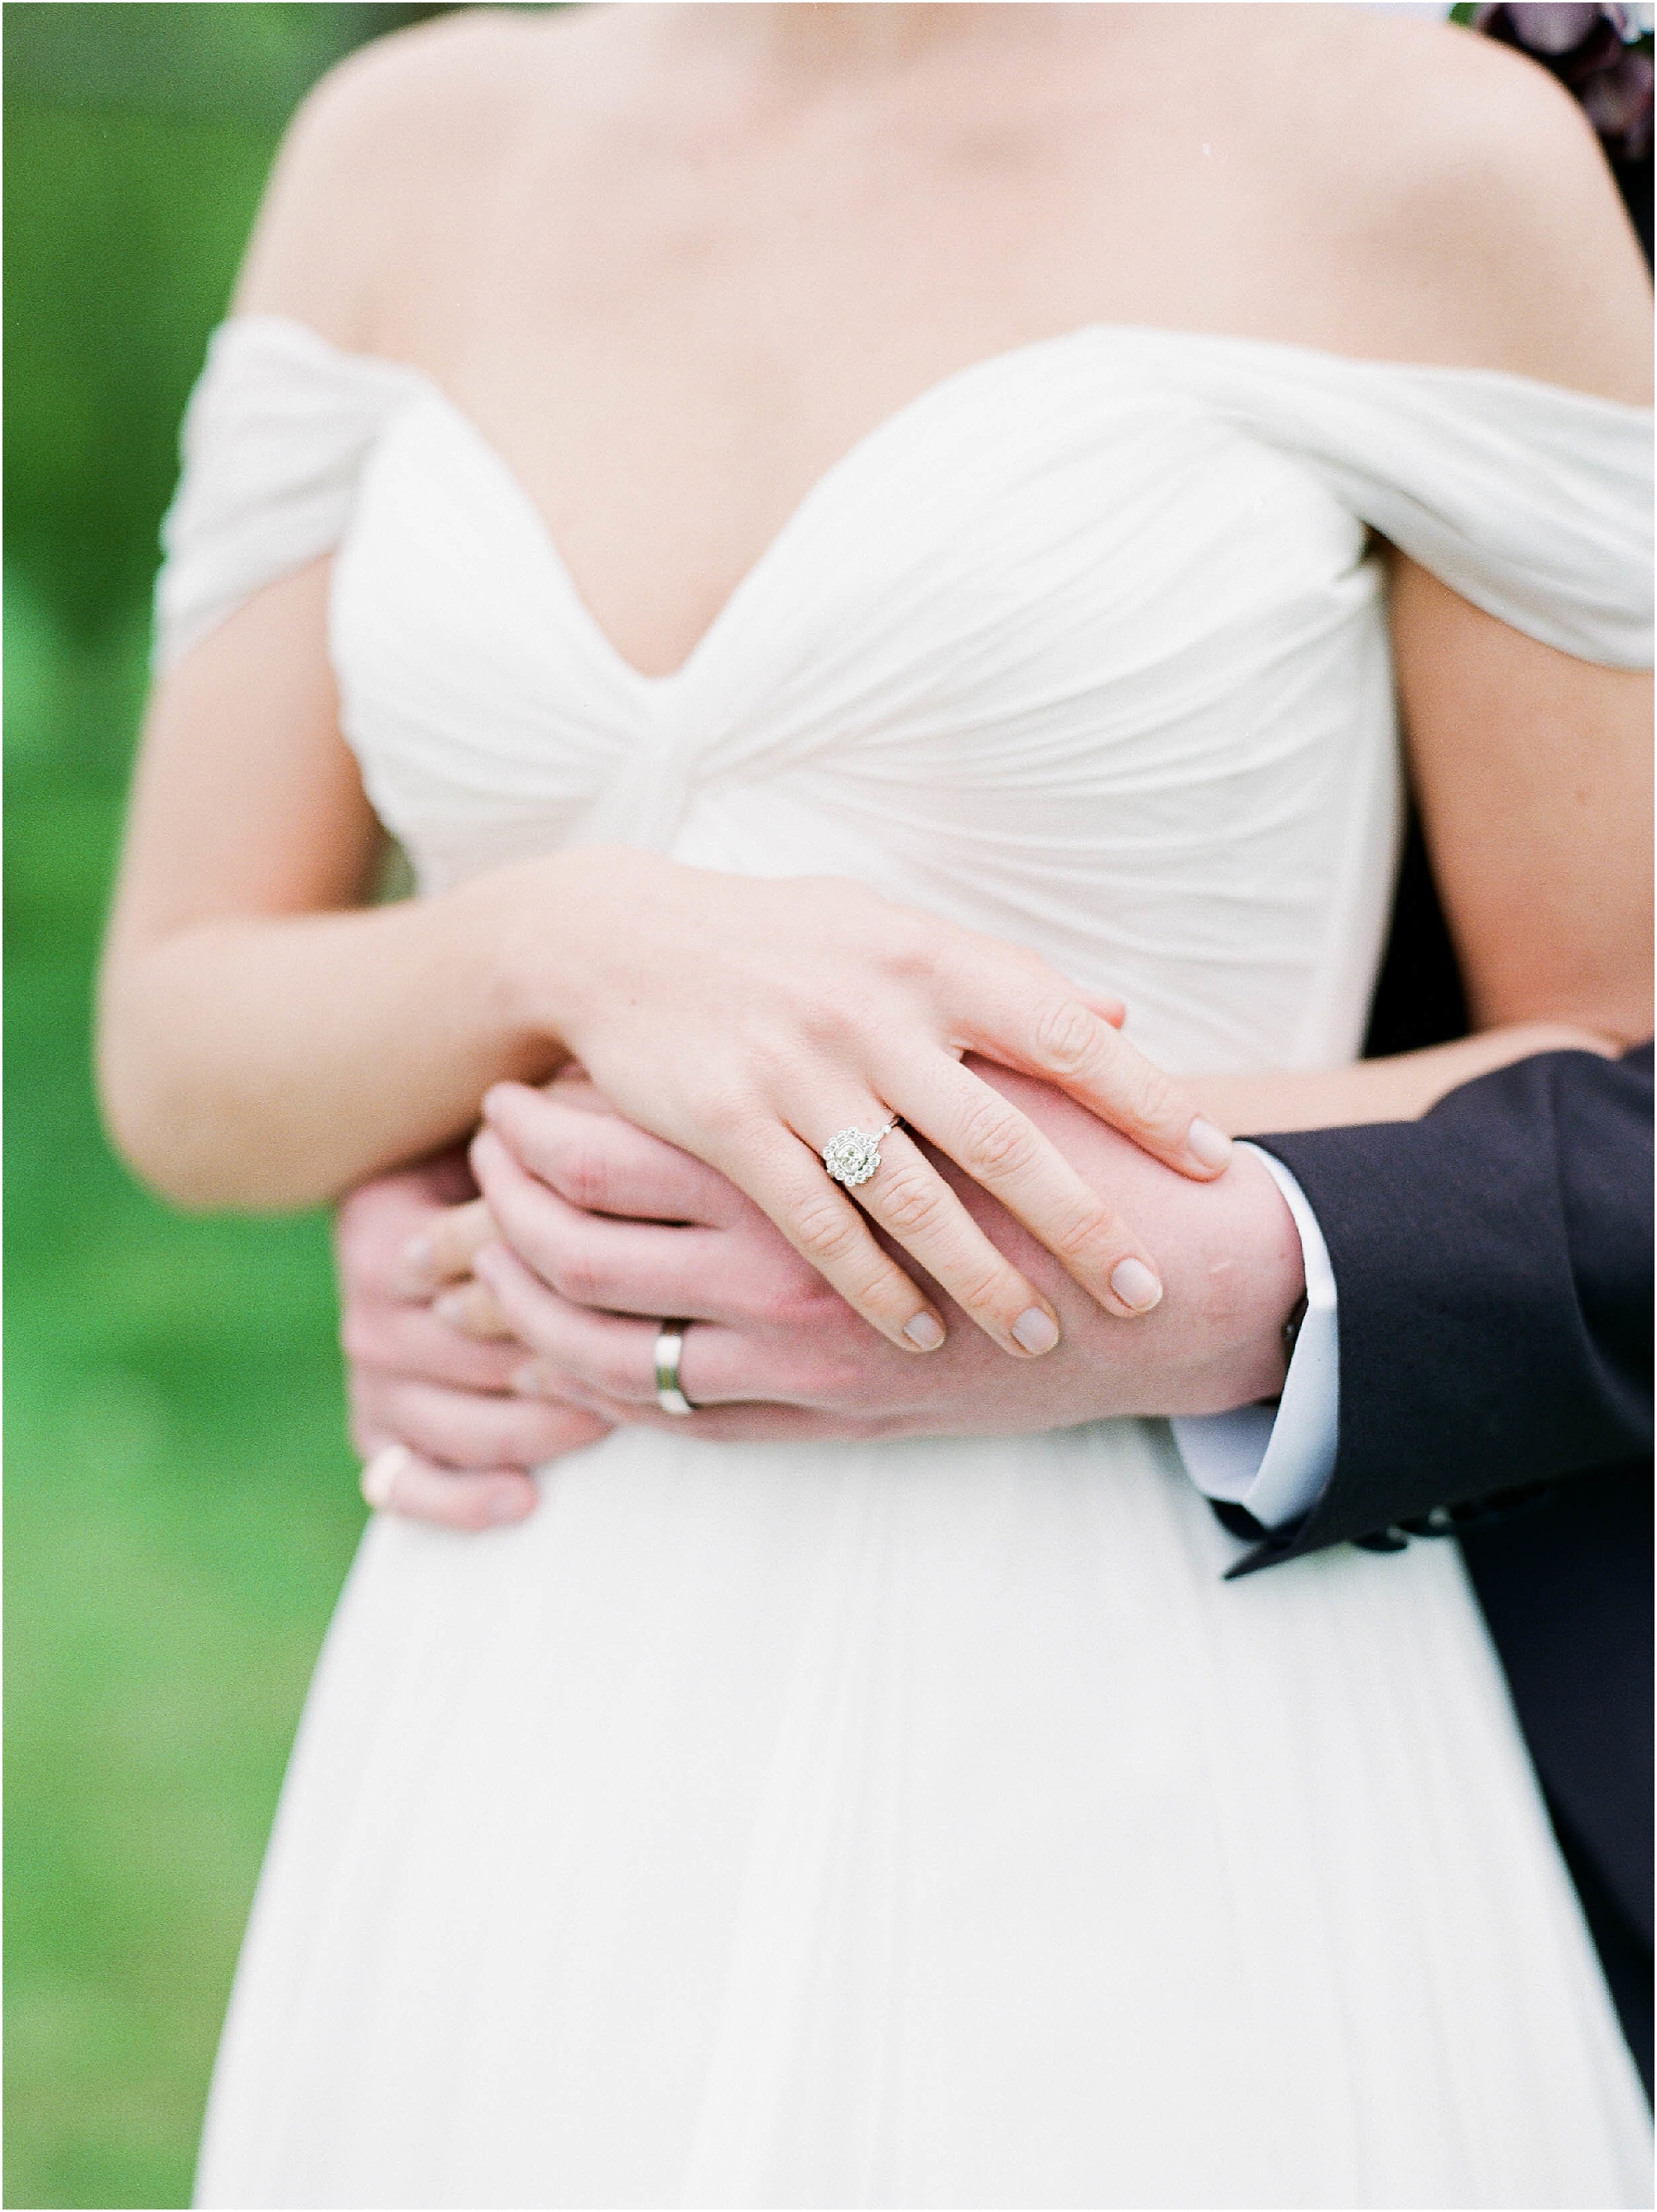 Wedding and engagement rings on bride and groom